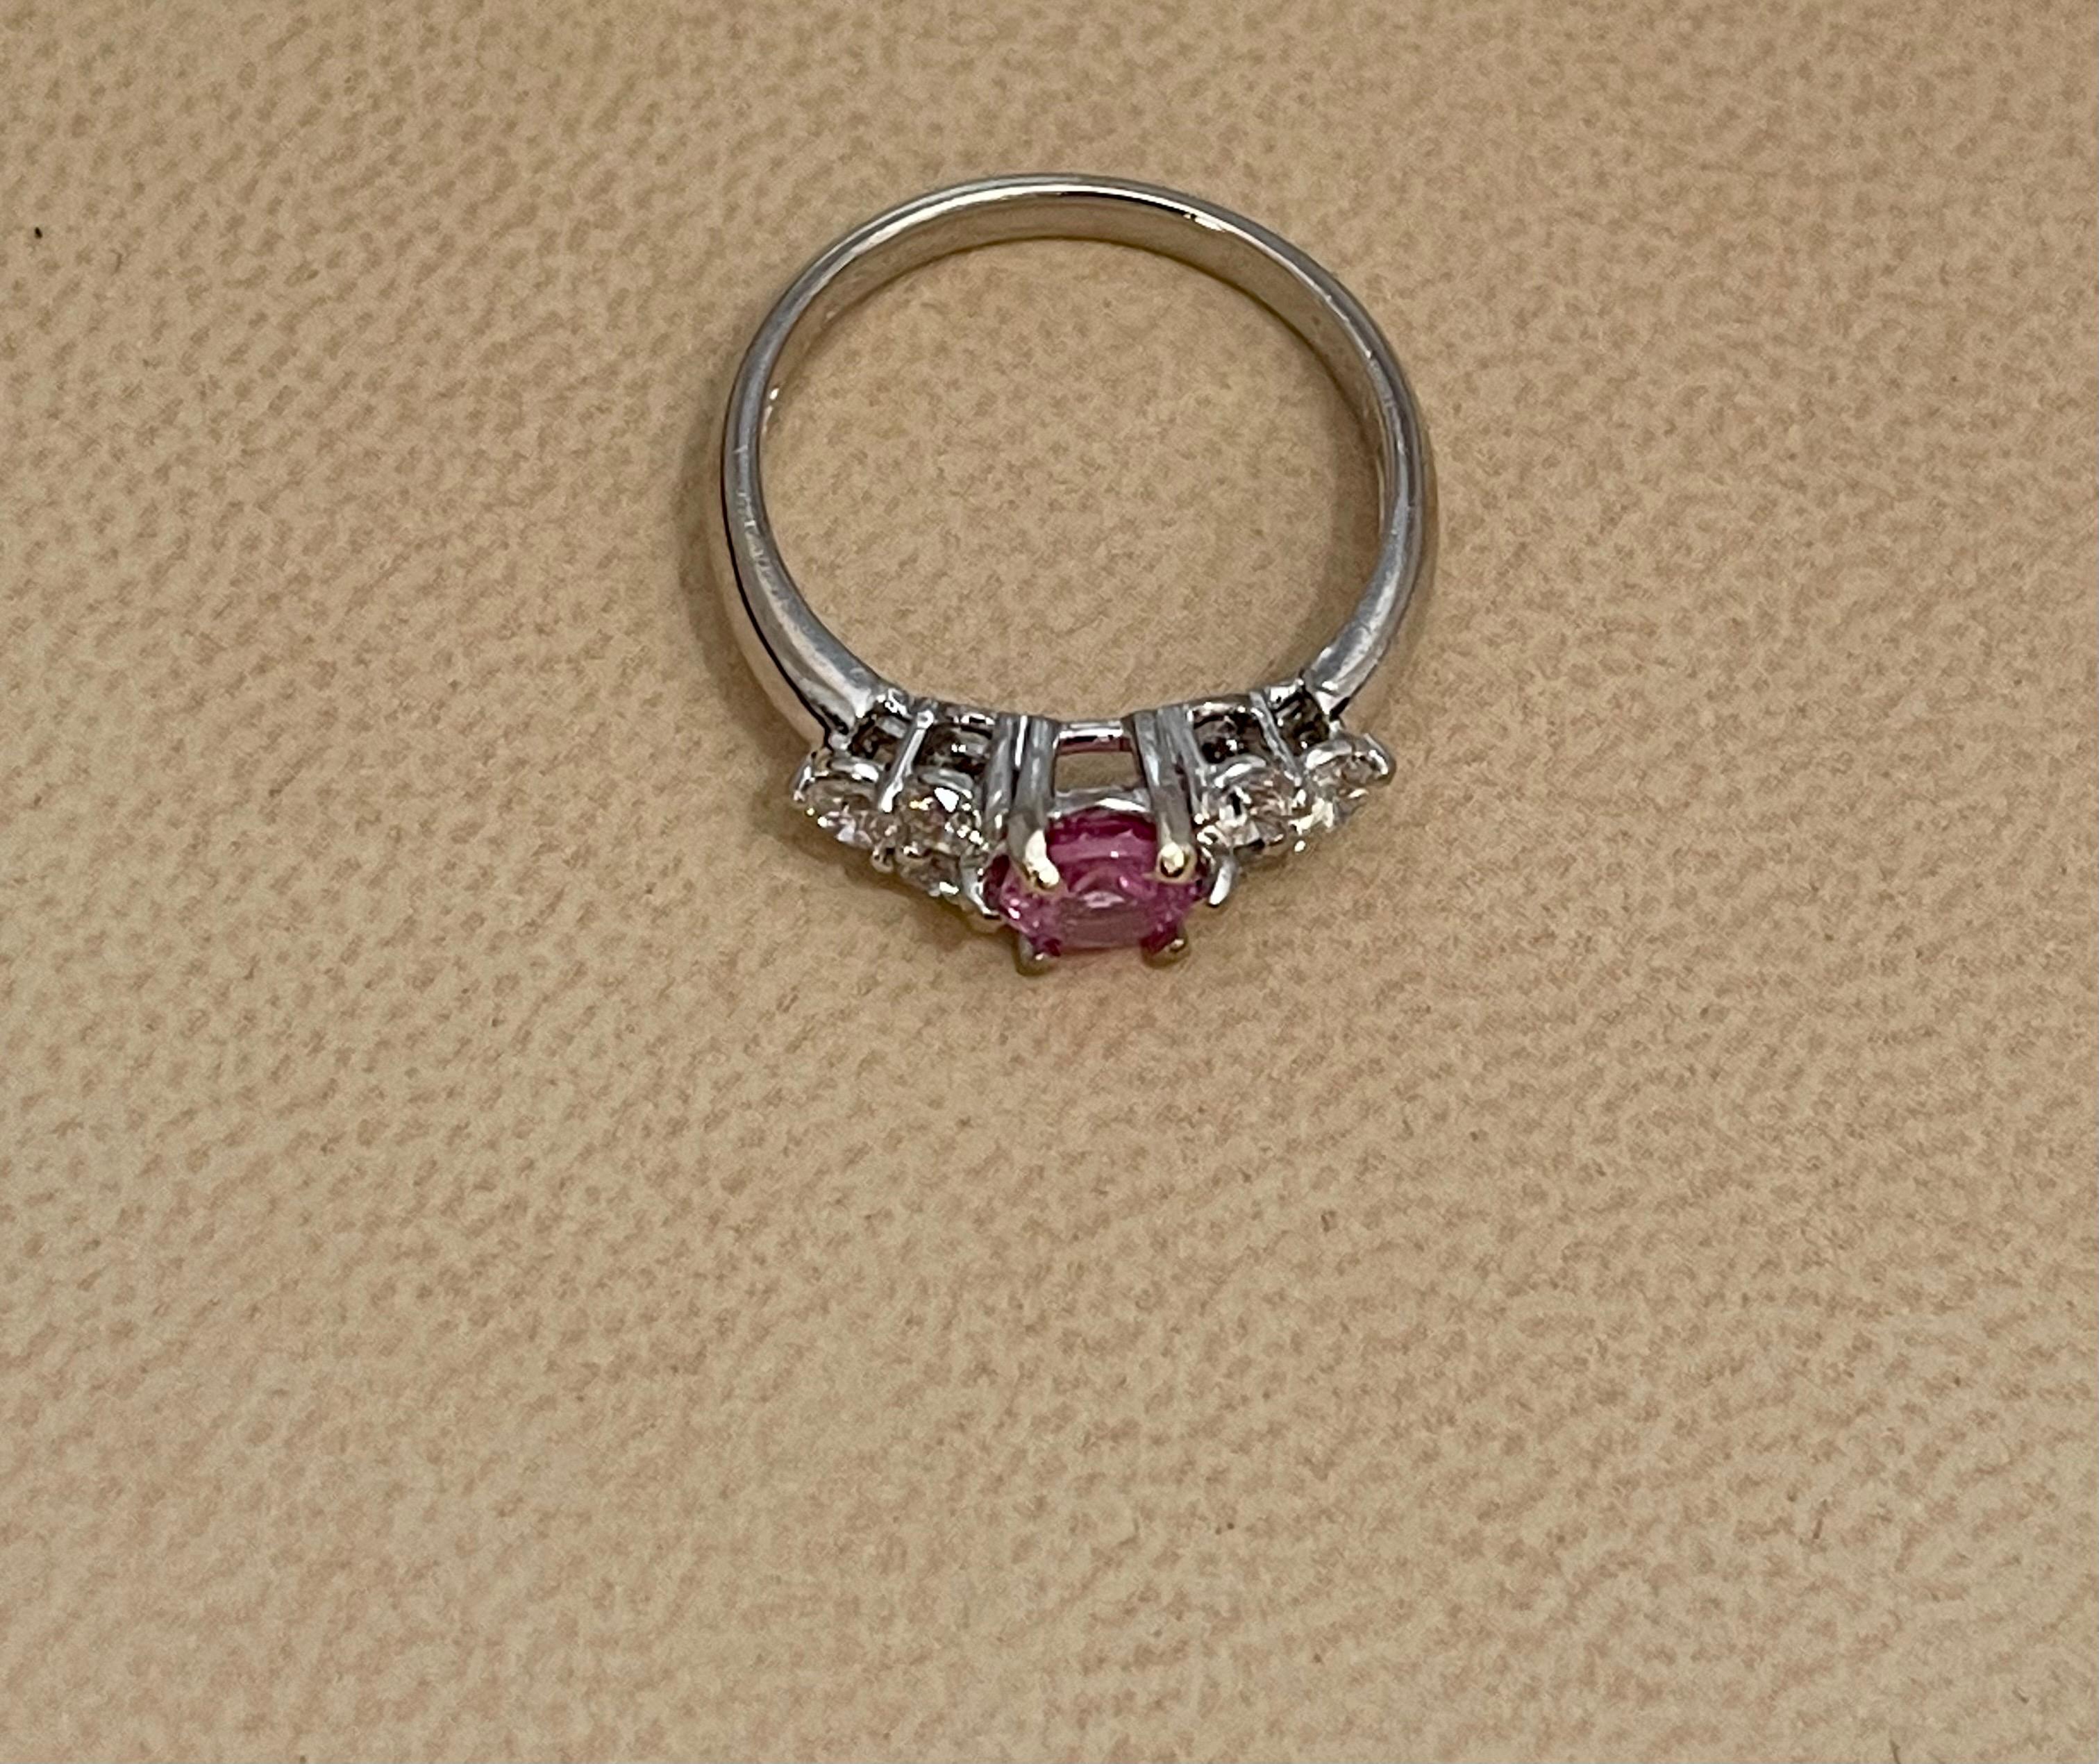 0.75 Ct Natural Pink Sapphire & 0.50 Ct Diamond Ring in 18 Karat White Gold For Sale 5